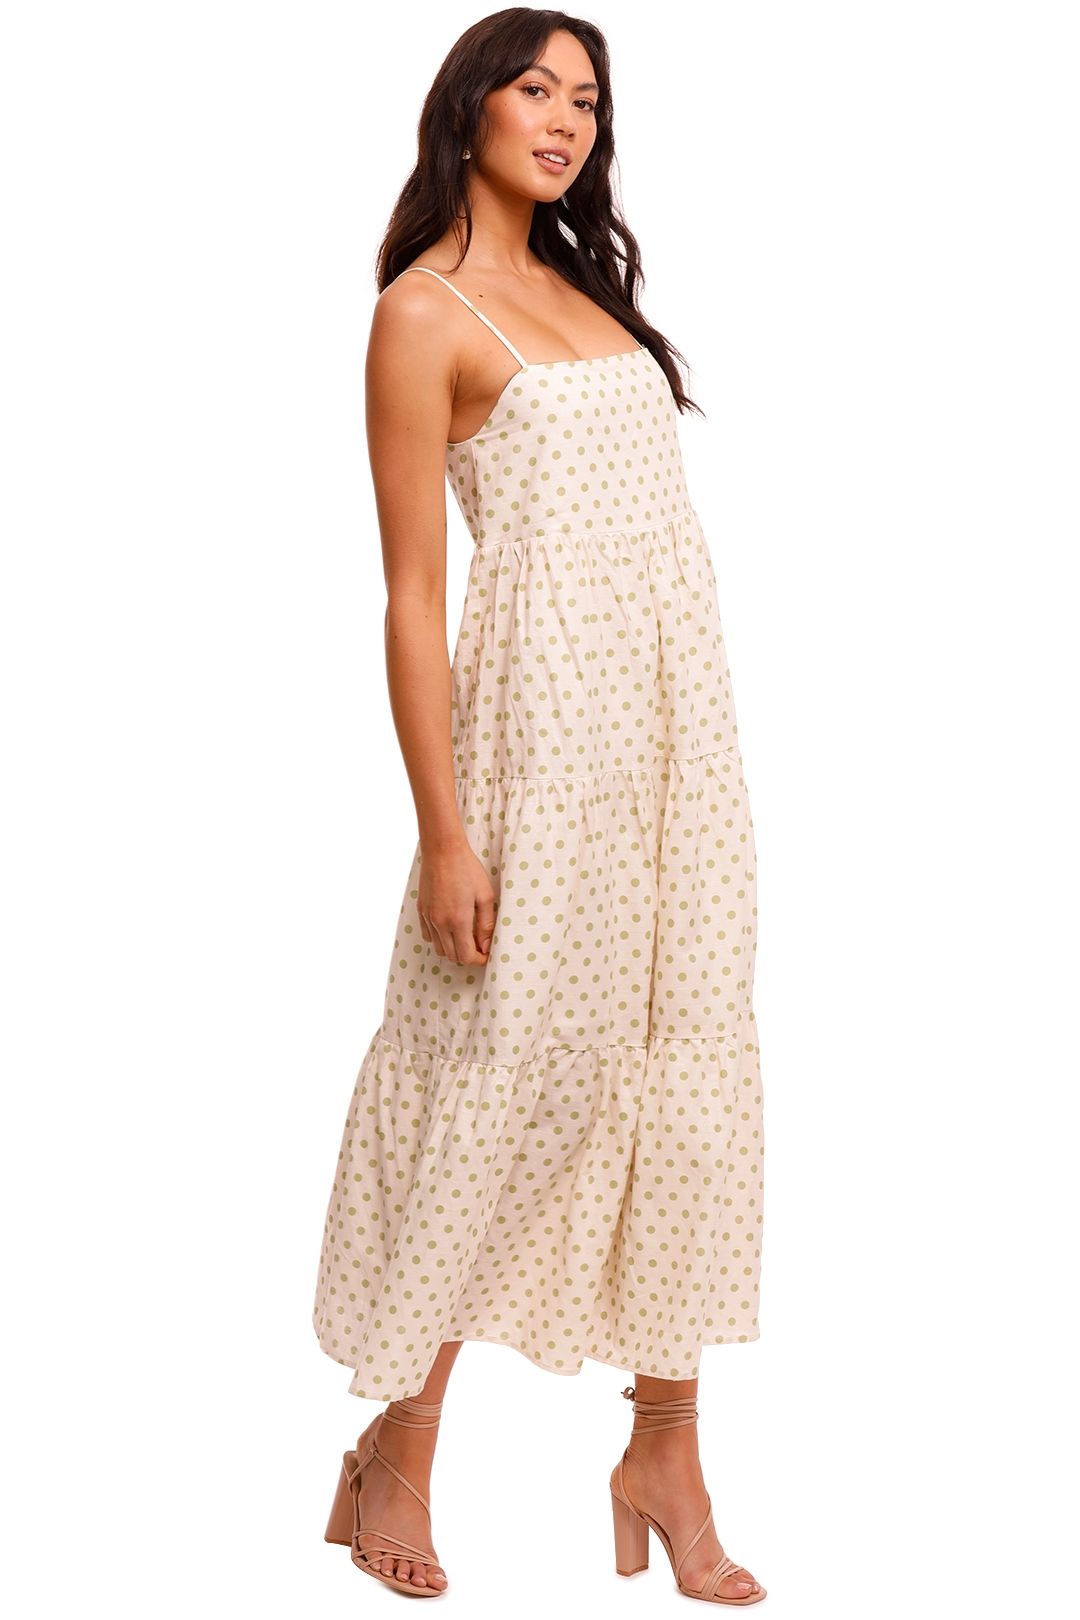 Charlie Holiday Isabella Maxi White Spot tiered